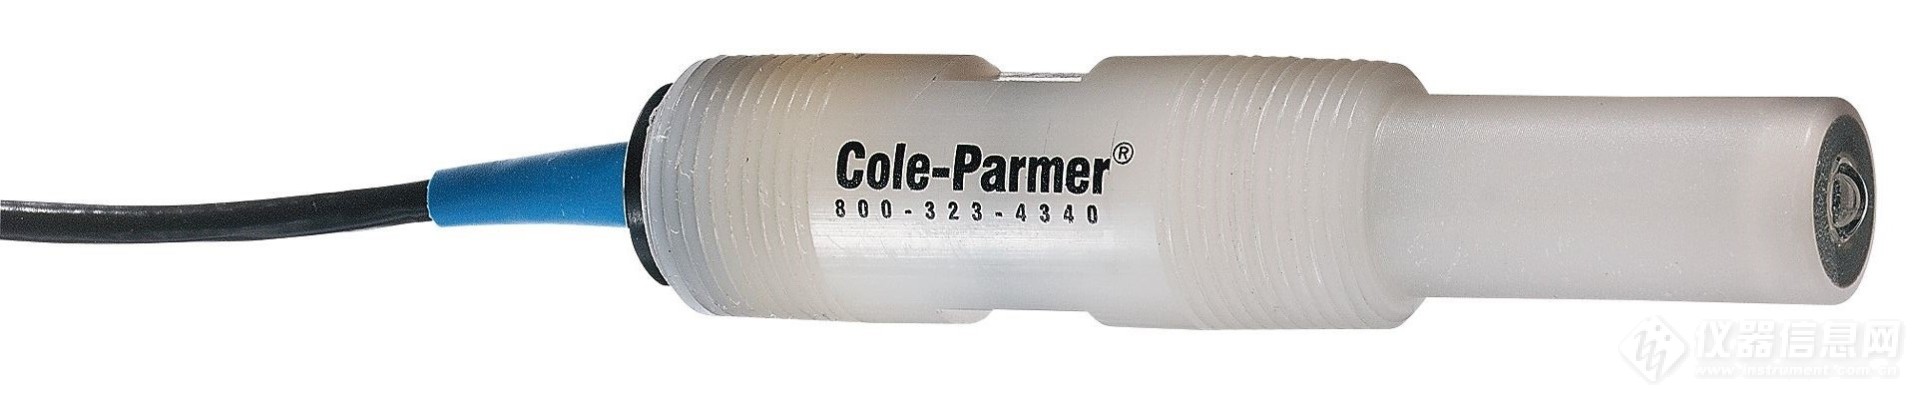 cole-parmer-2700320-self-cleaning-ph-electrode-ryton-housing-10-ft-cable-bnc-2700320.jpg